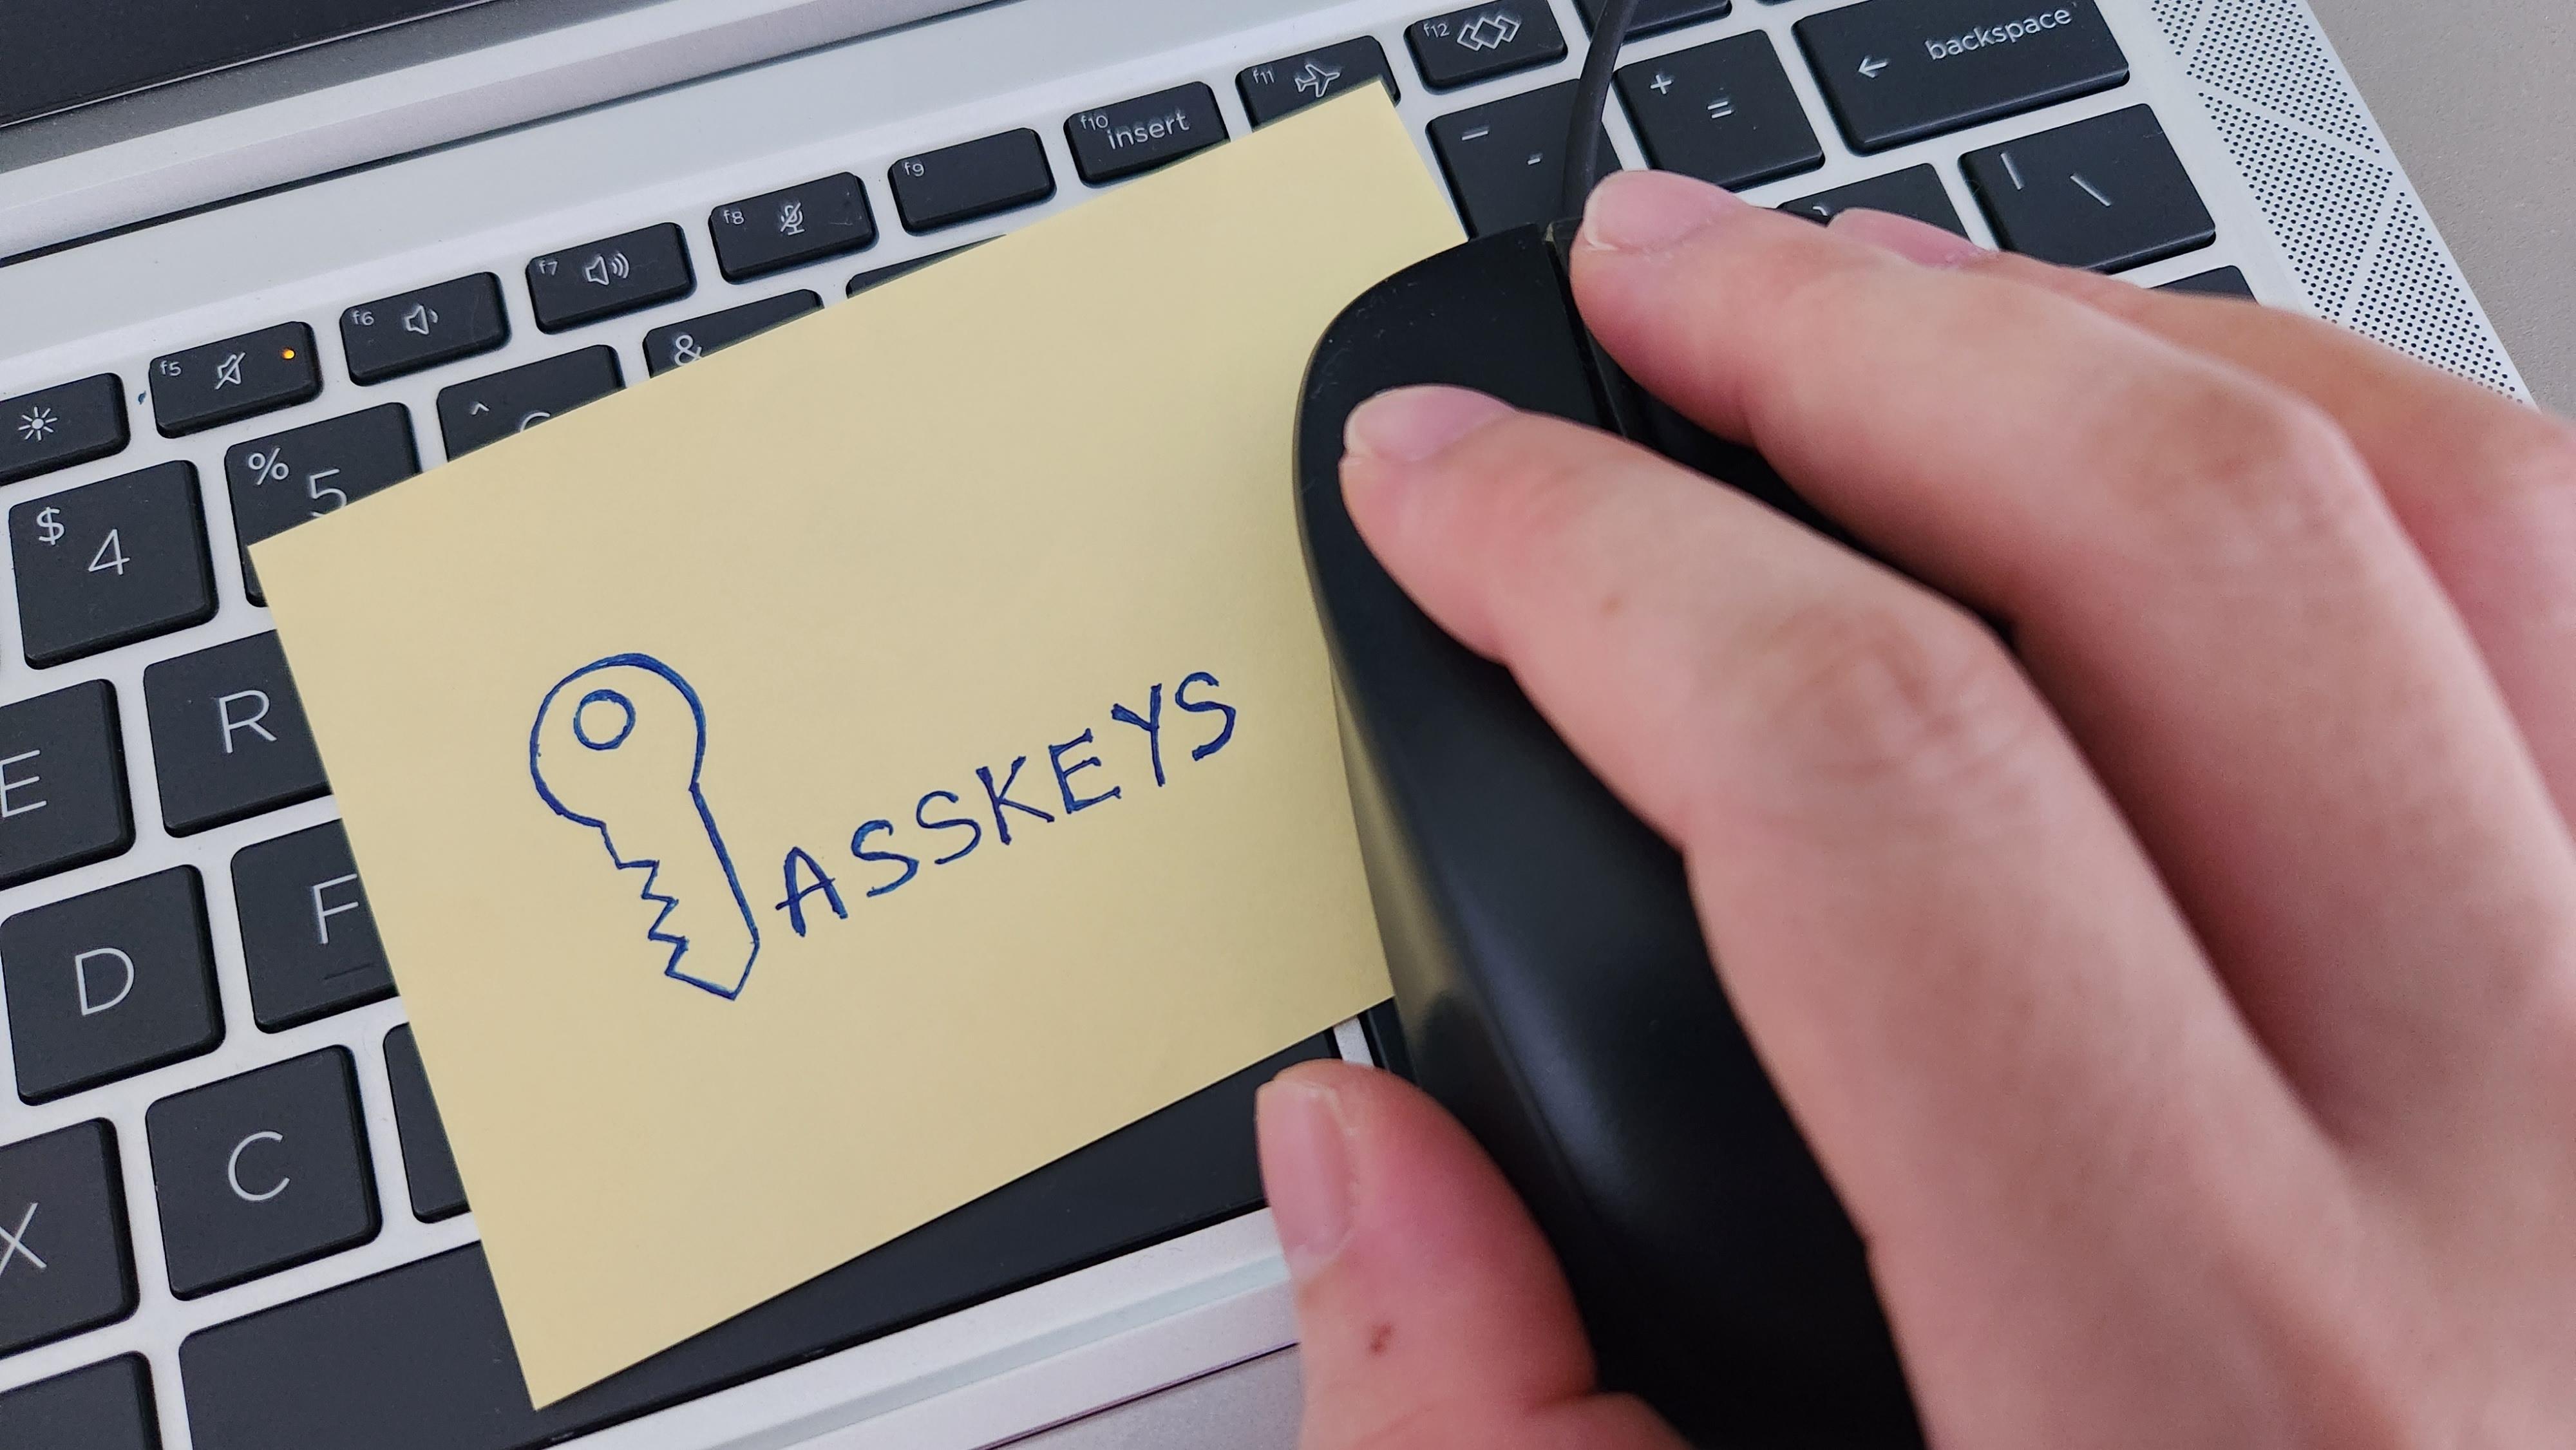 A sticky note with the word Passkeys placed on a keyboard